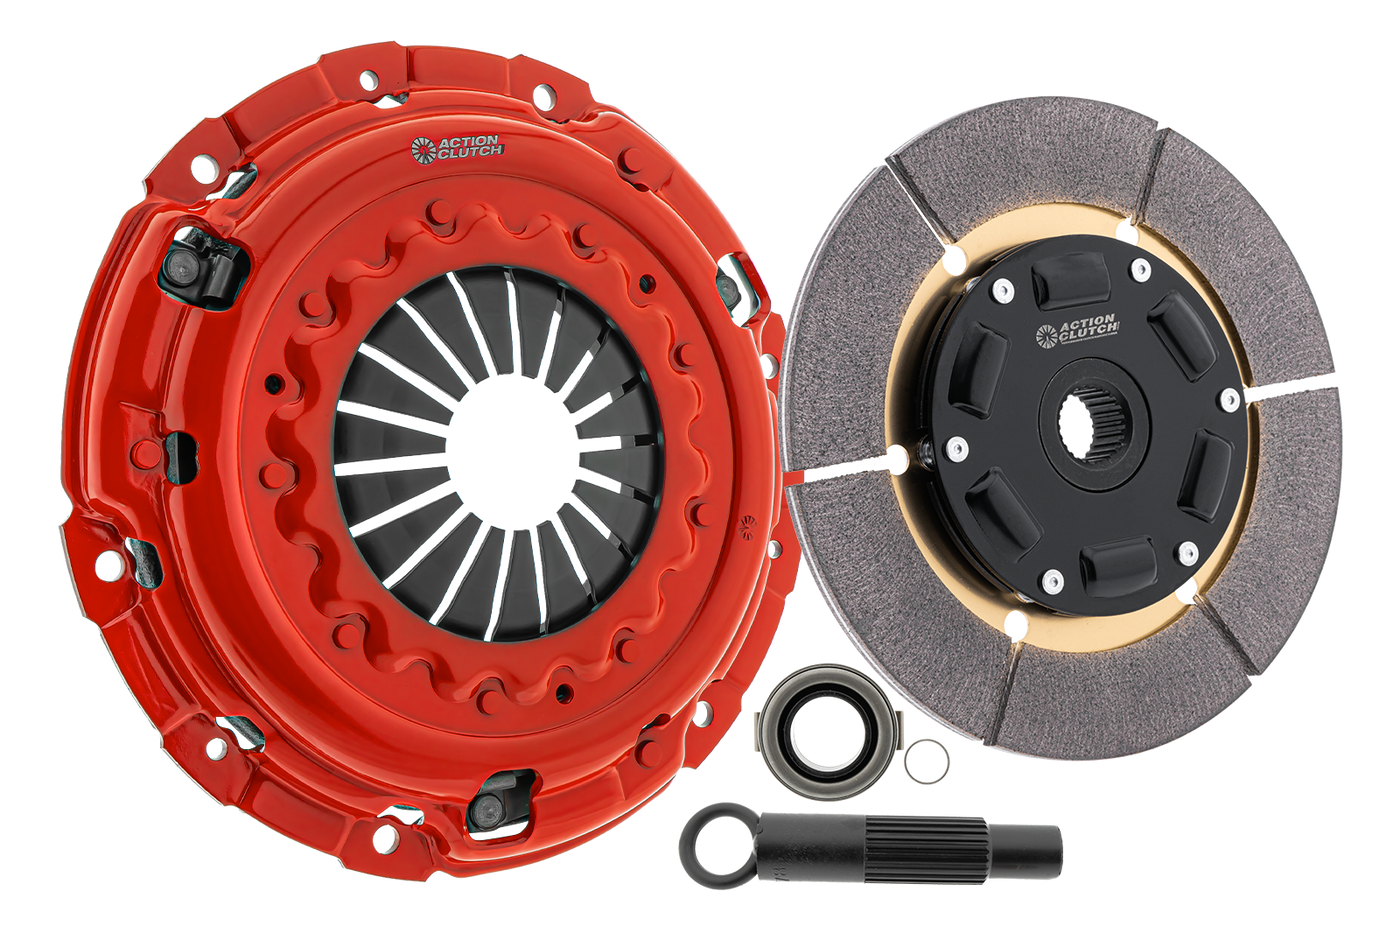 Ironman Sprung (Street) Clutch Kit for Nissan 300ZX 1984-1988 3.0L (VG30E) Non-Turbo